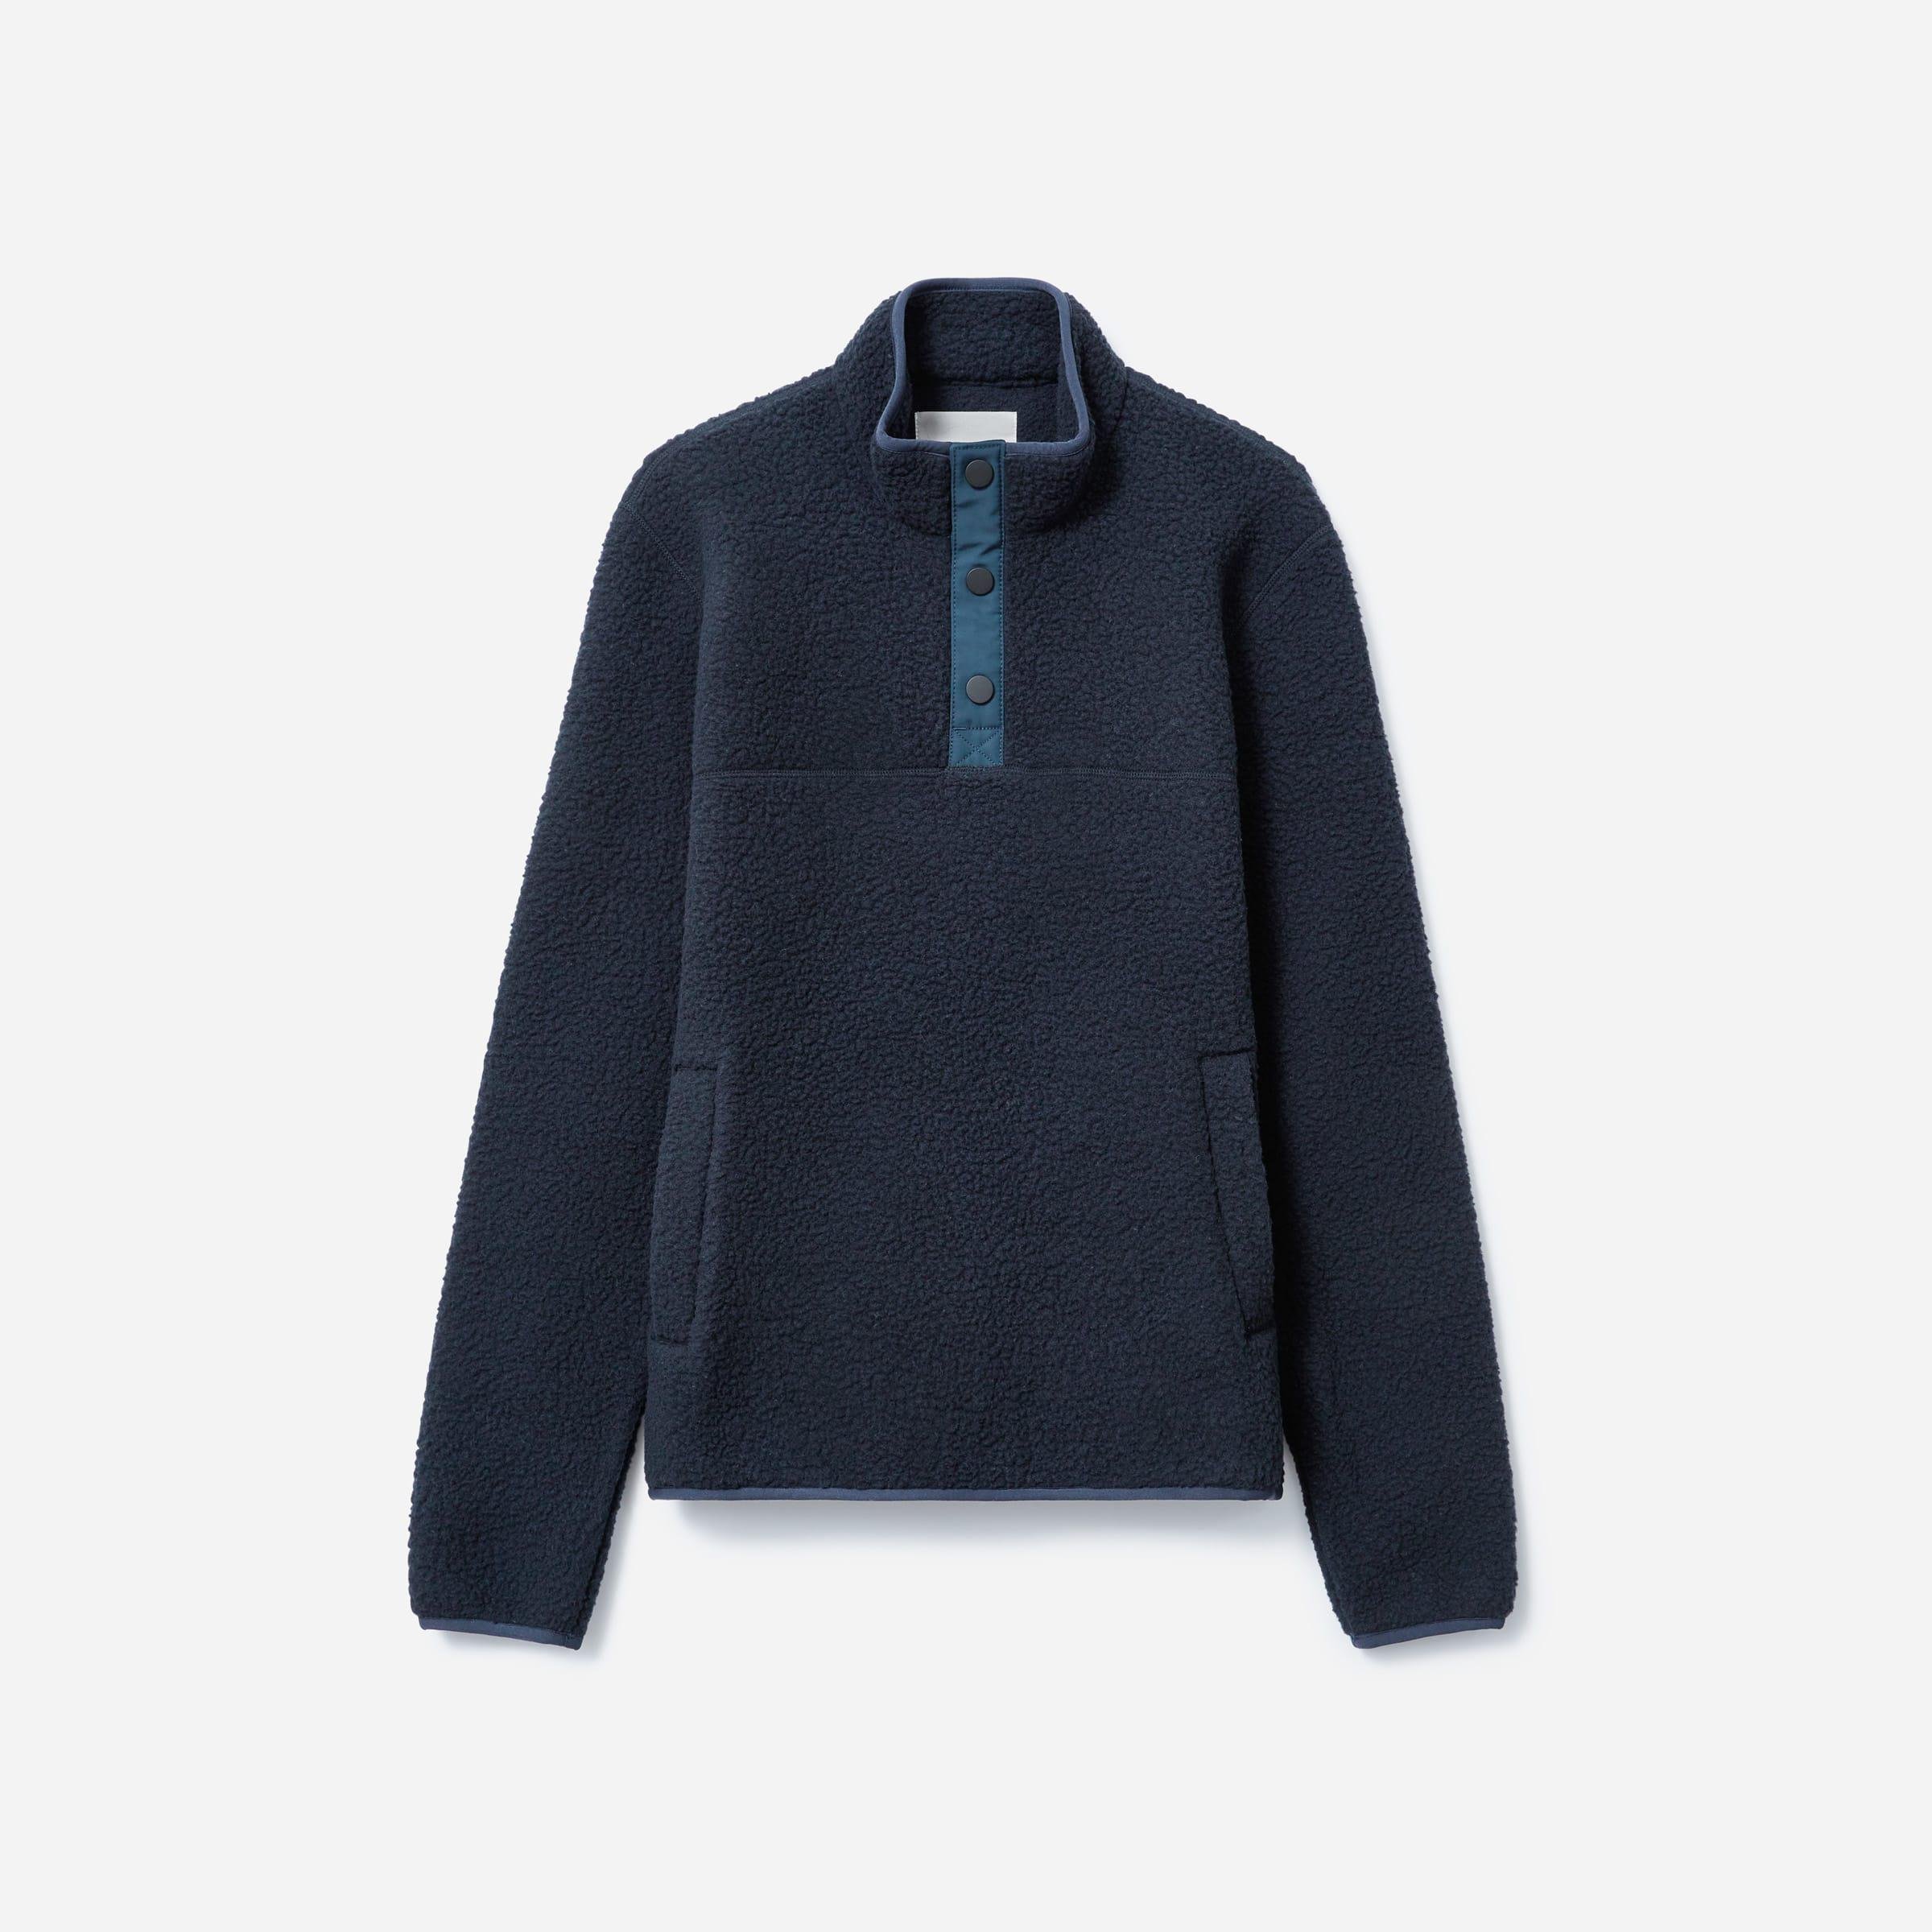 The ReNew Fleece Pullover by EVERLANE